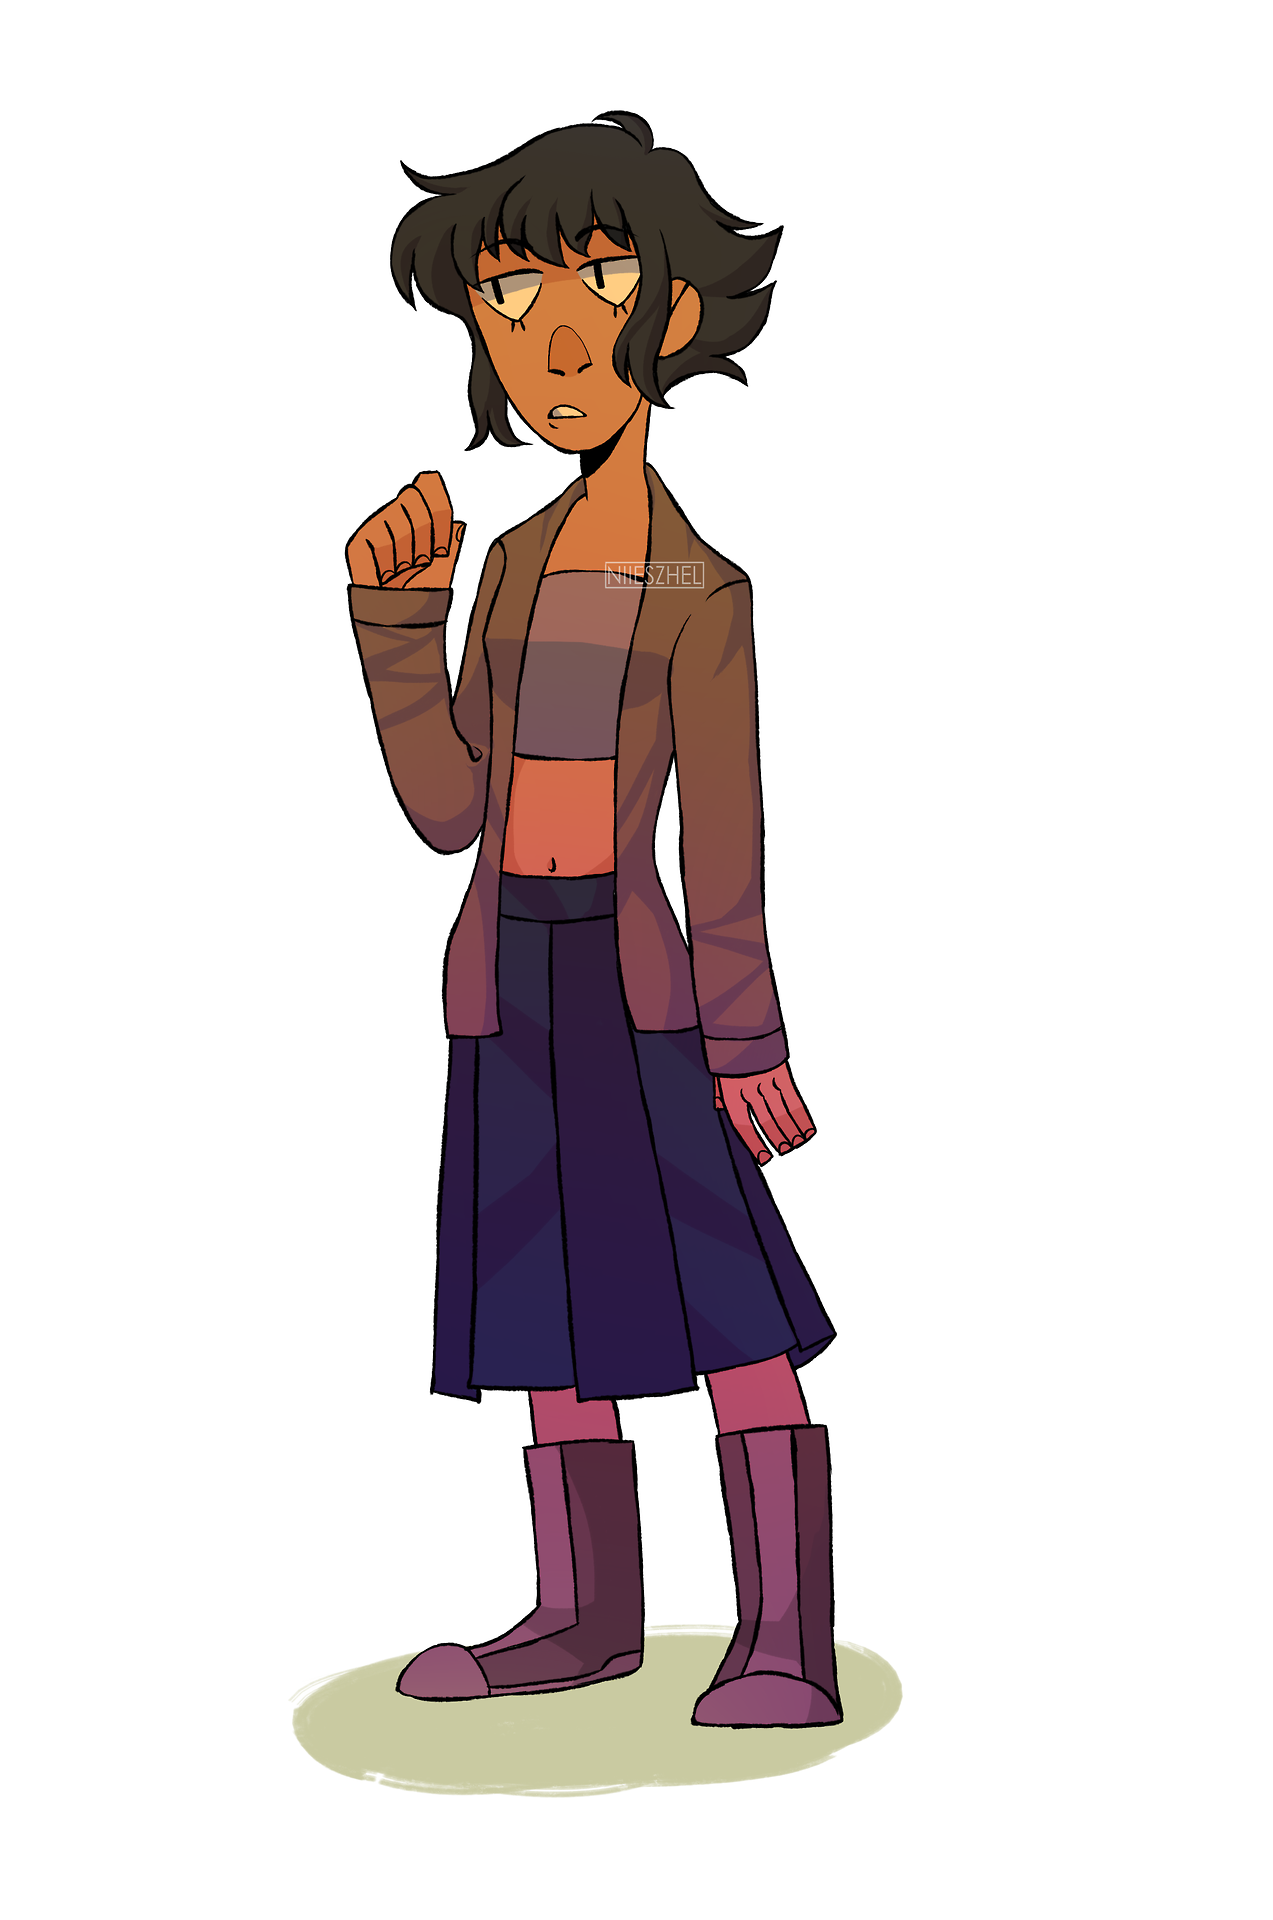 i was abt to draw ocs but no one cares so have a human Lapis haha